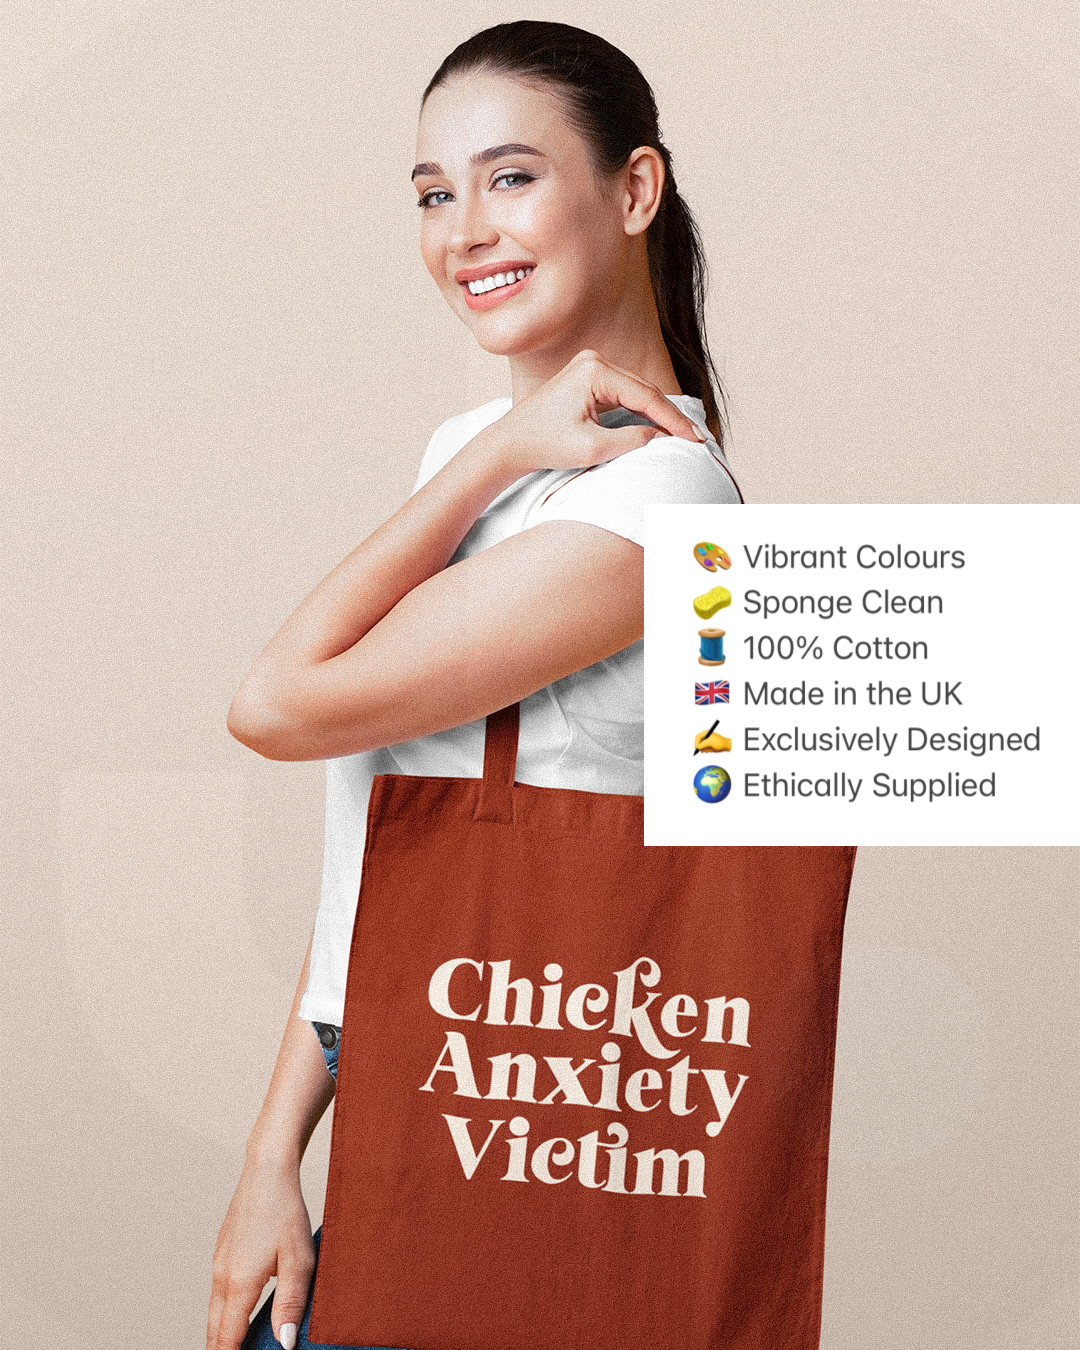 Chicken Anxiety Victim Tote Bag - Funny Tote Bags - Chicken Anxiety - Chicken Anxiety Victim Tote Bag